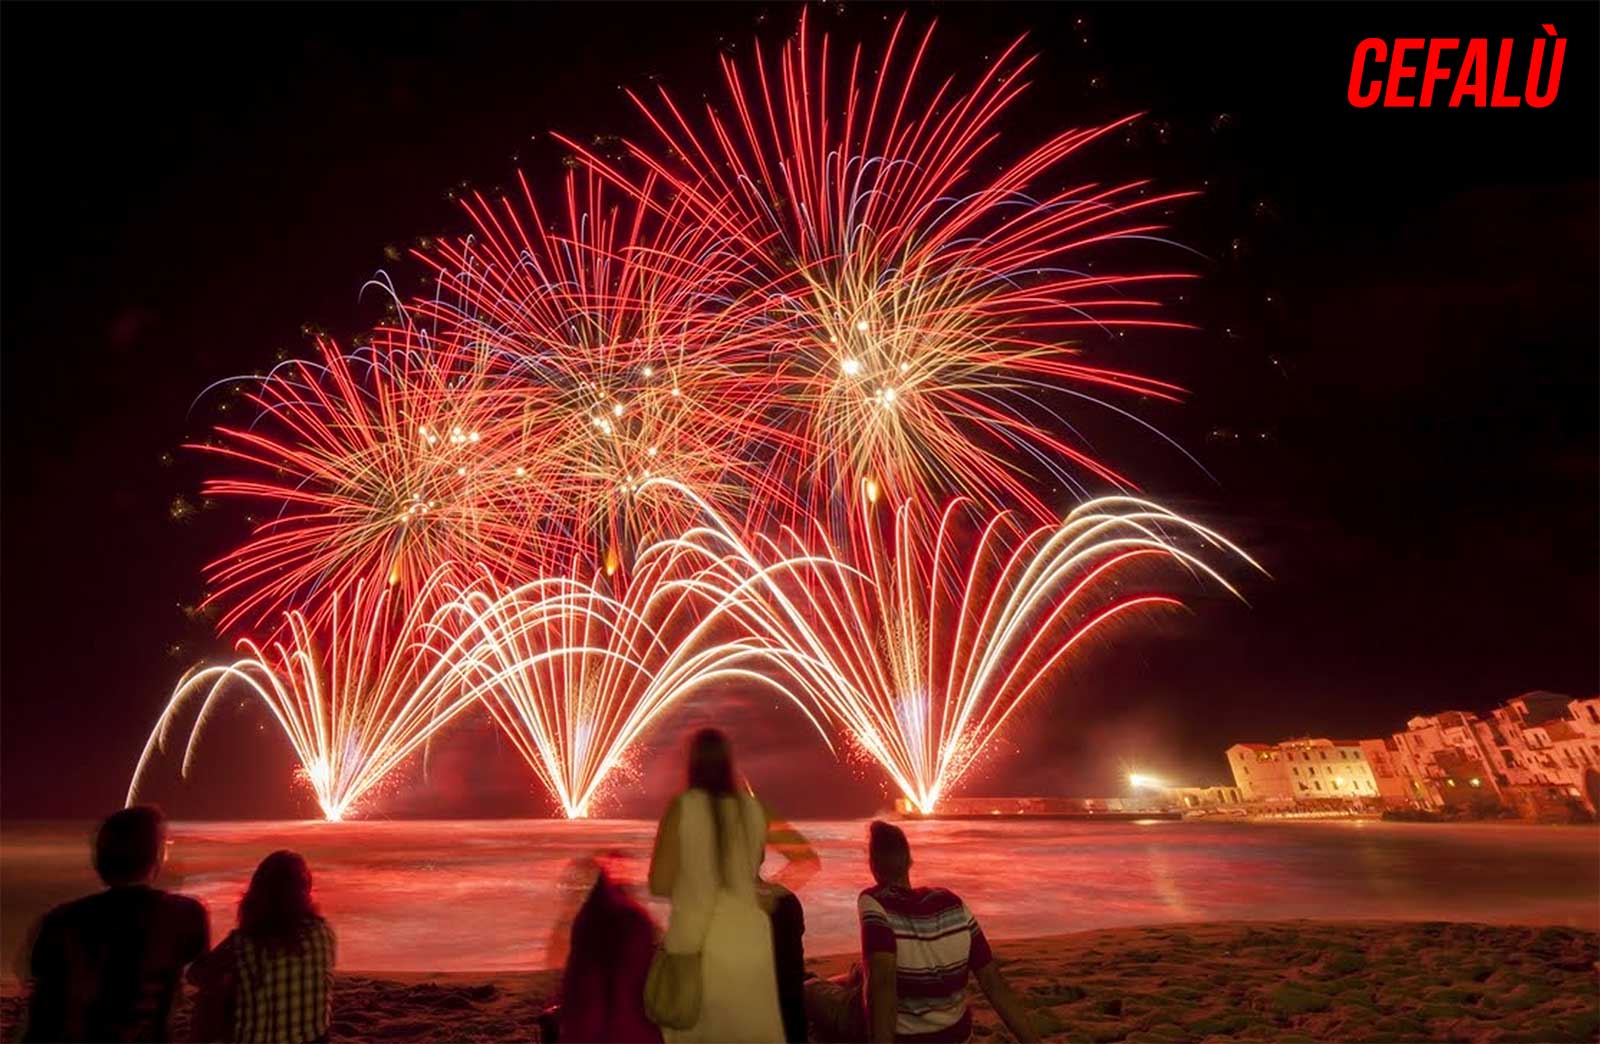 The fireworks of August 6, 2014 to the end of the village festival in Cefalu